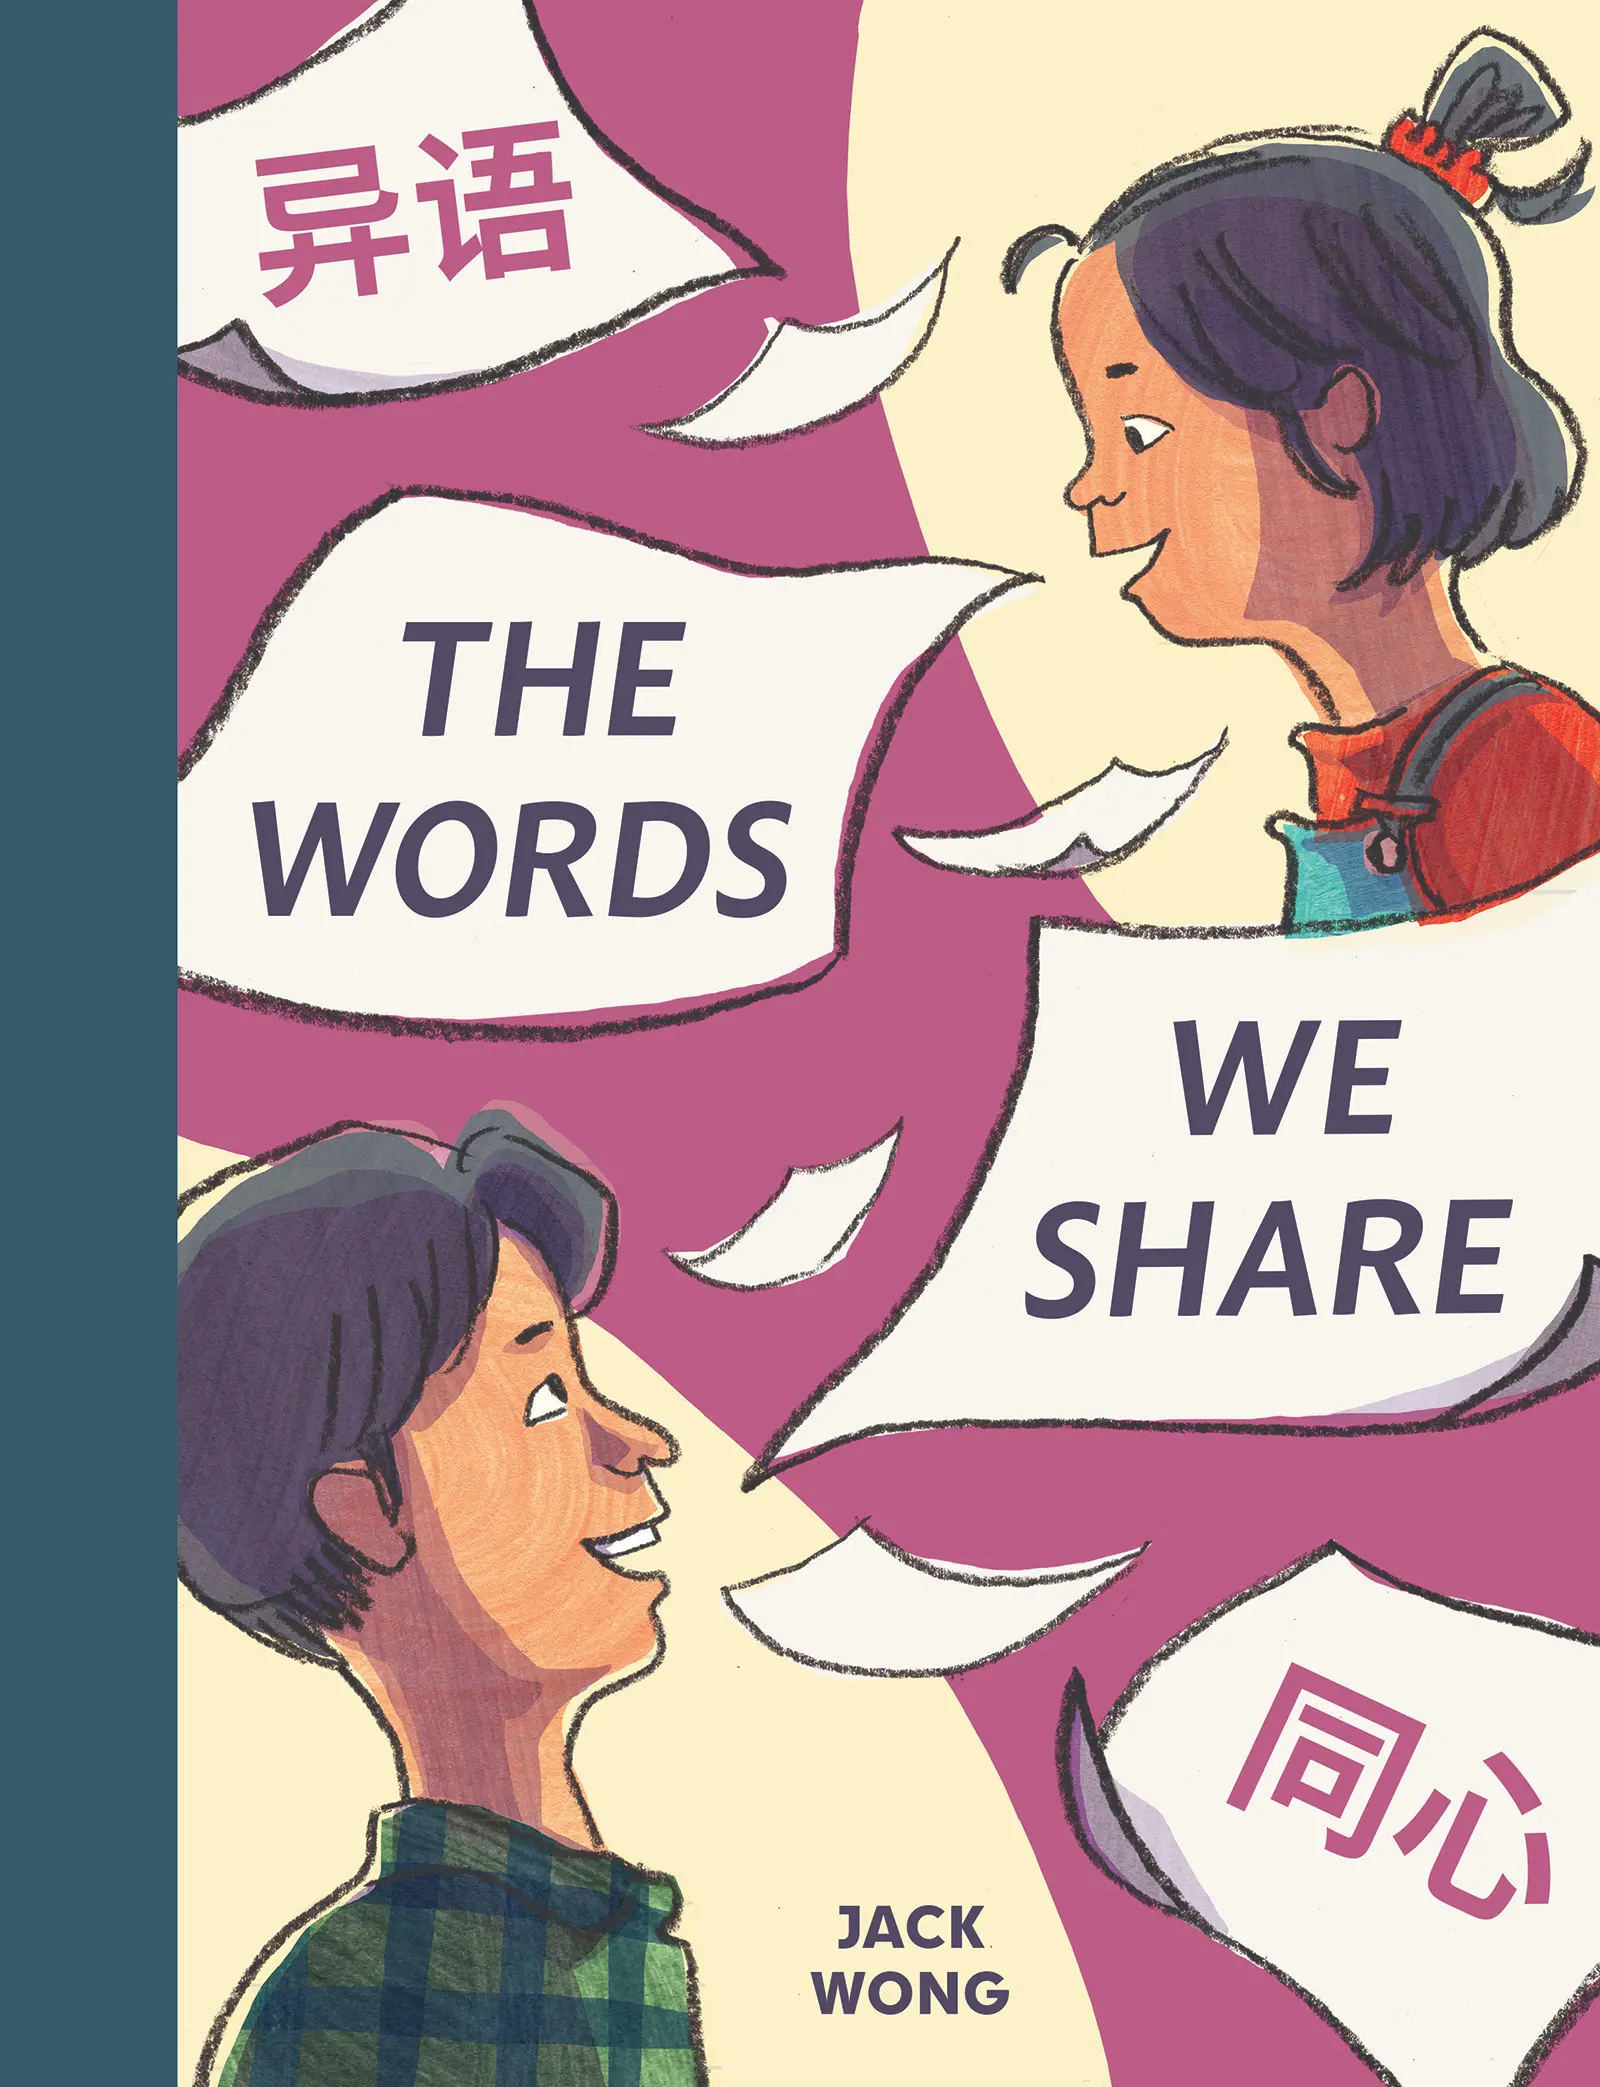 The cover of The Words We Share by Jack Wong.